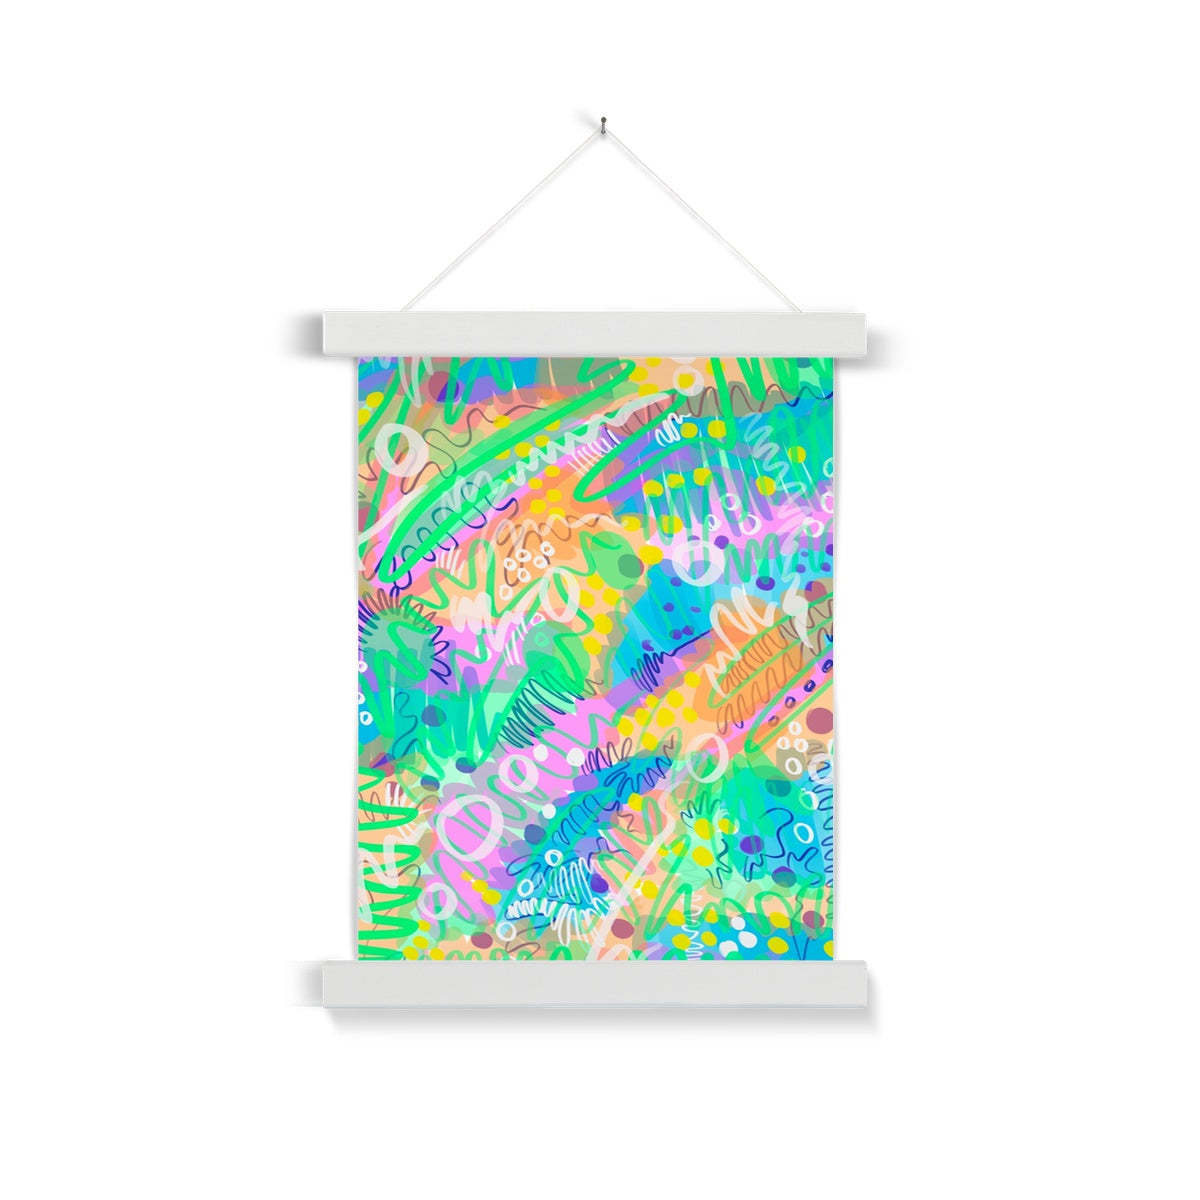 White wooden poster hanger. The print: an abstract line drawing. it uses green/yellow/purple/pink/blue/yellow. The colours are fresh and bright. there are circles, squiggles and dots.